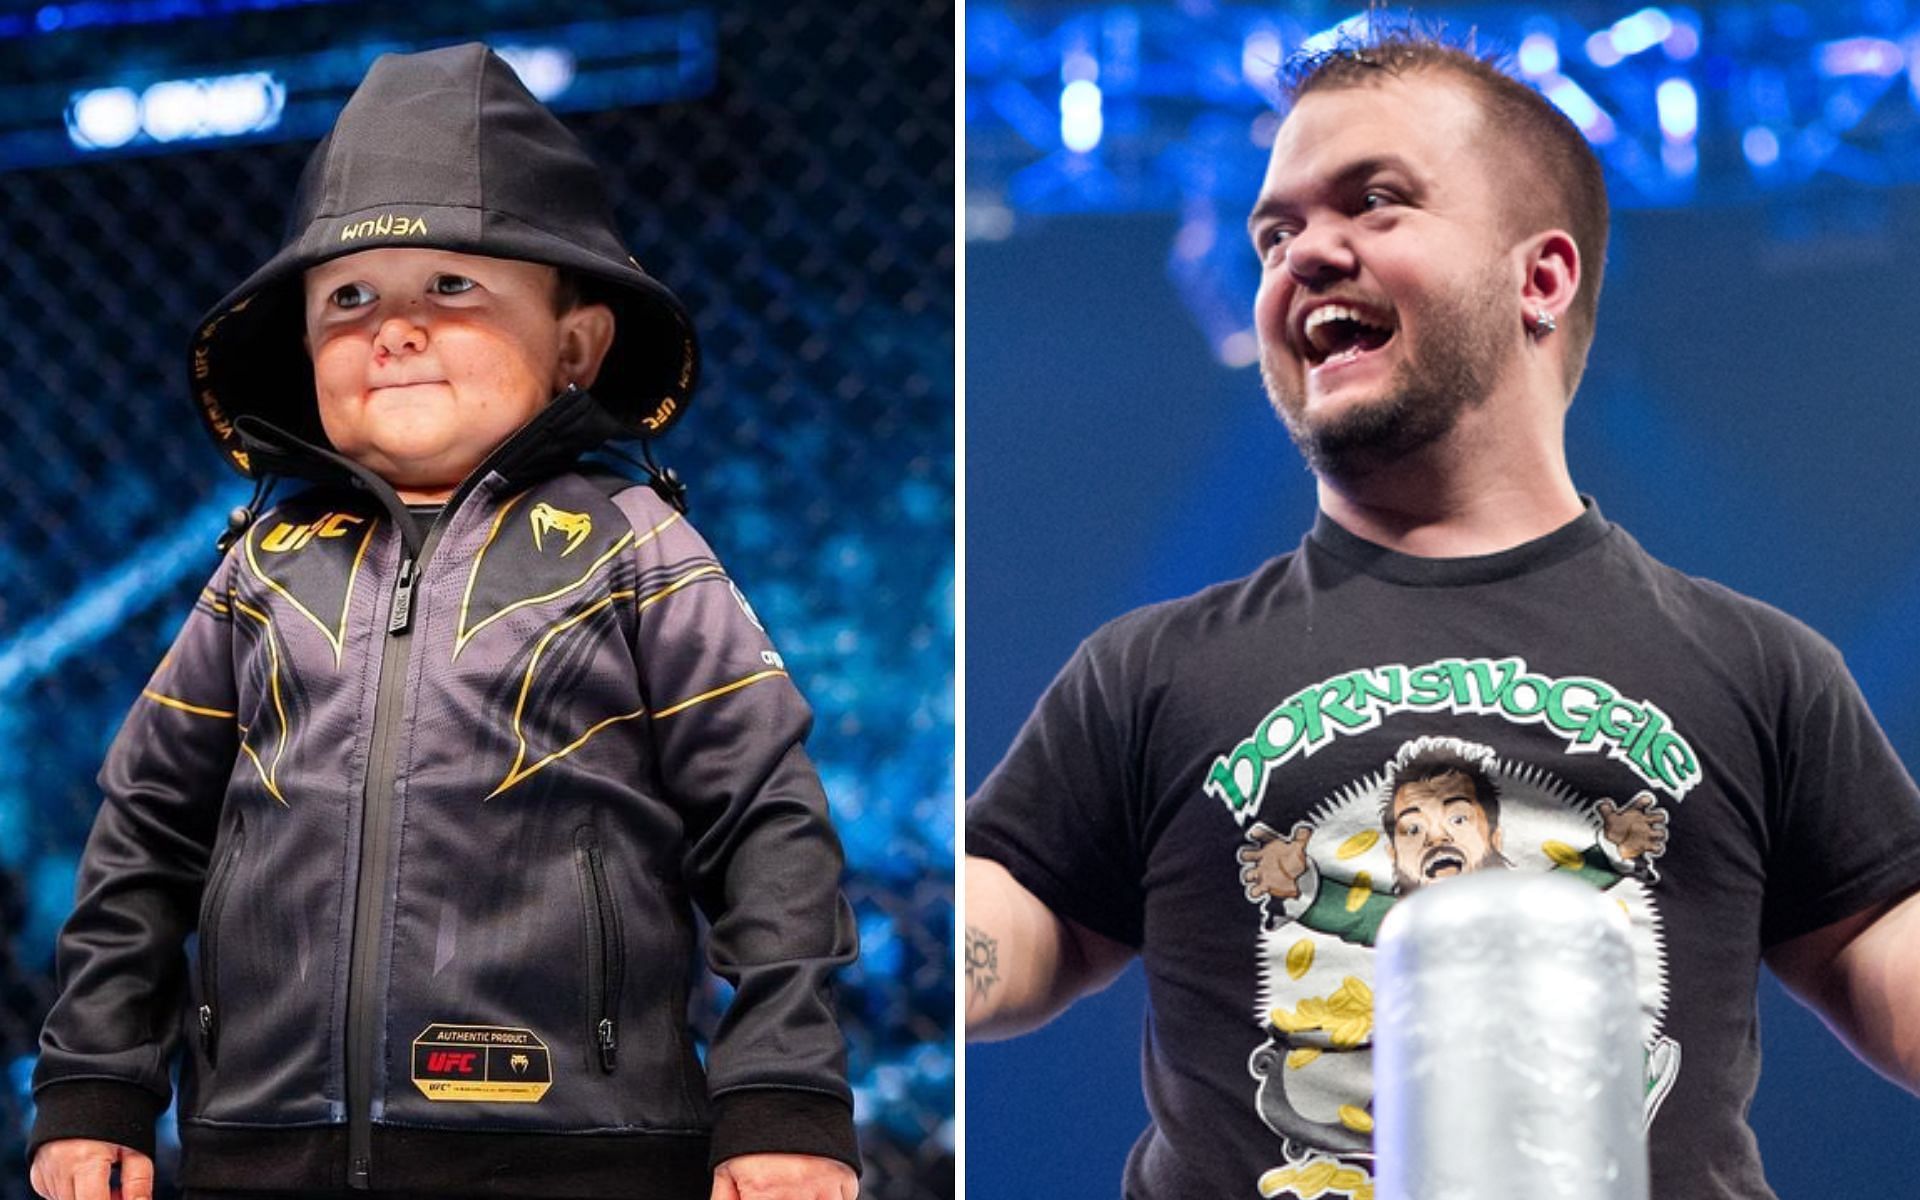 Hasbulla [Left], and Hornswoggle [Right] [Photo credit: @Hasbulla_NFT - Twitter, and wwe.com]